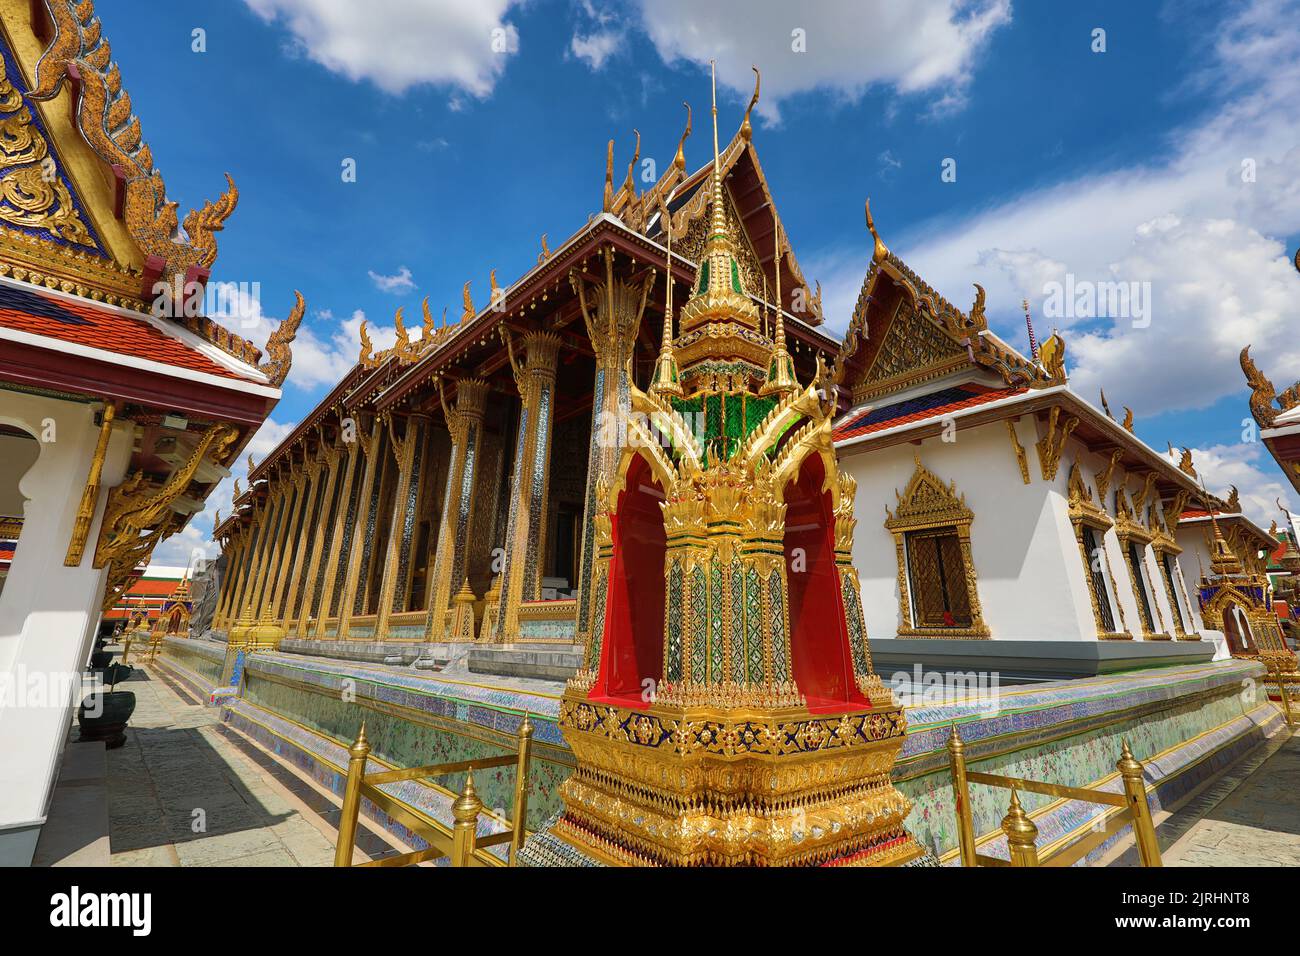 Sala at Wat Phra Kaew, in front of the Temple of the Emerald Buddha, Bangkok, Thailand Stock Photo